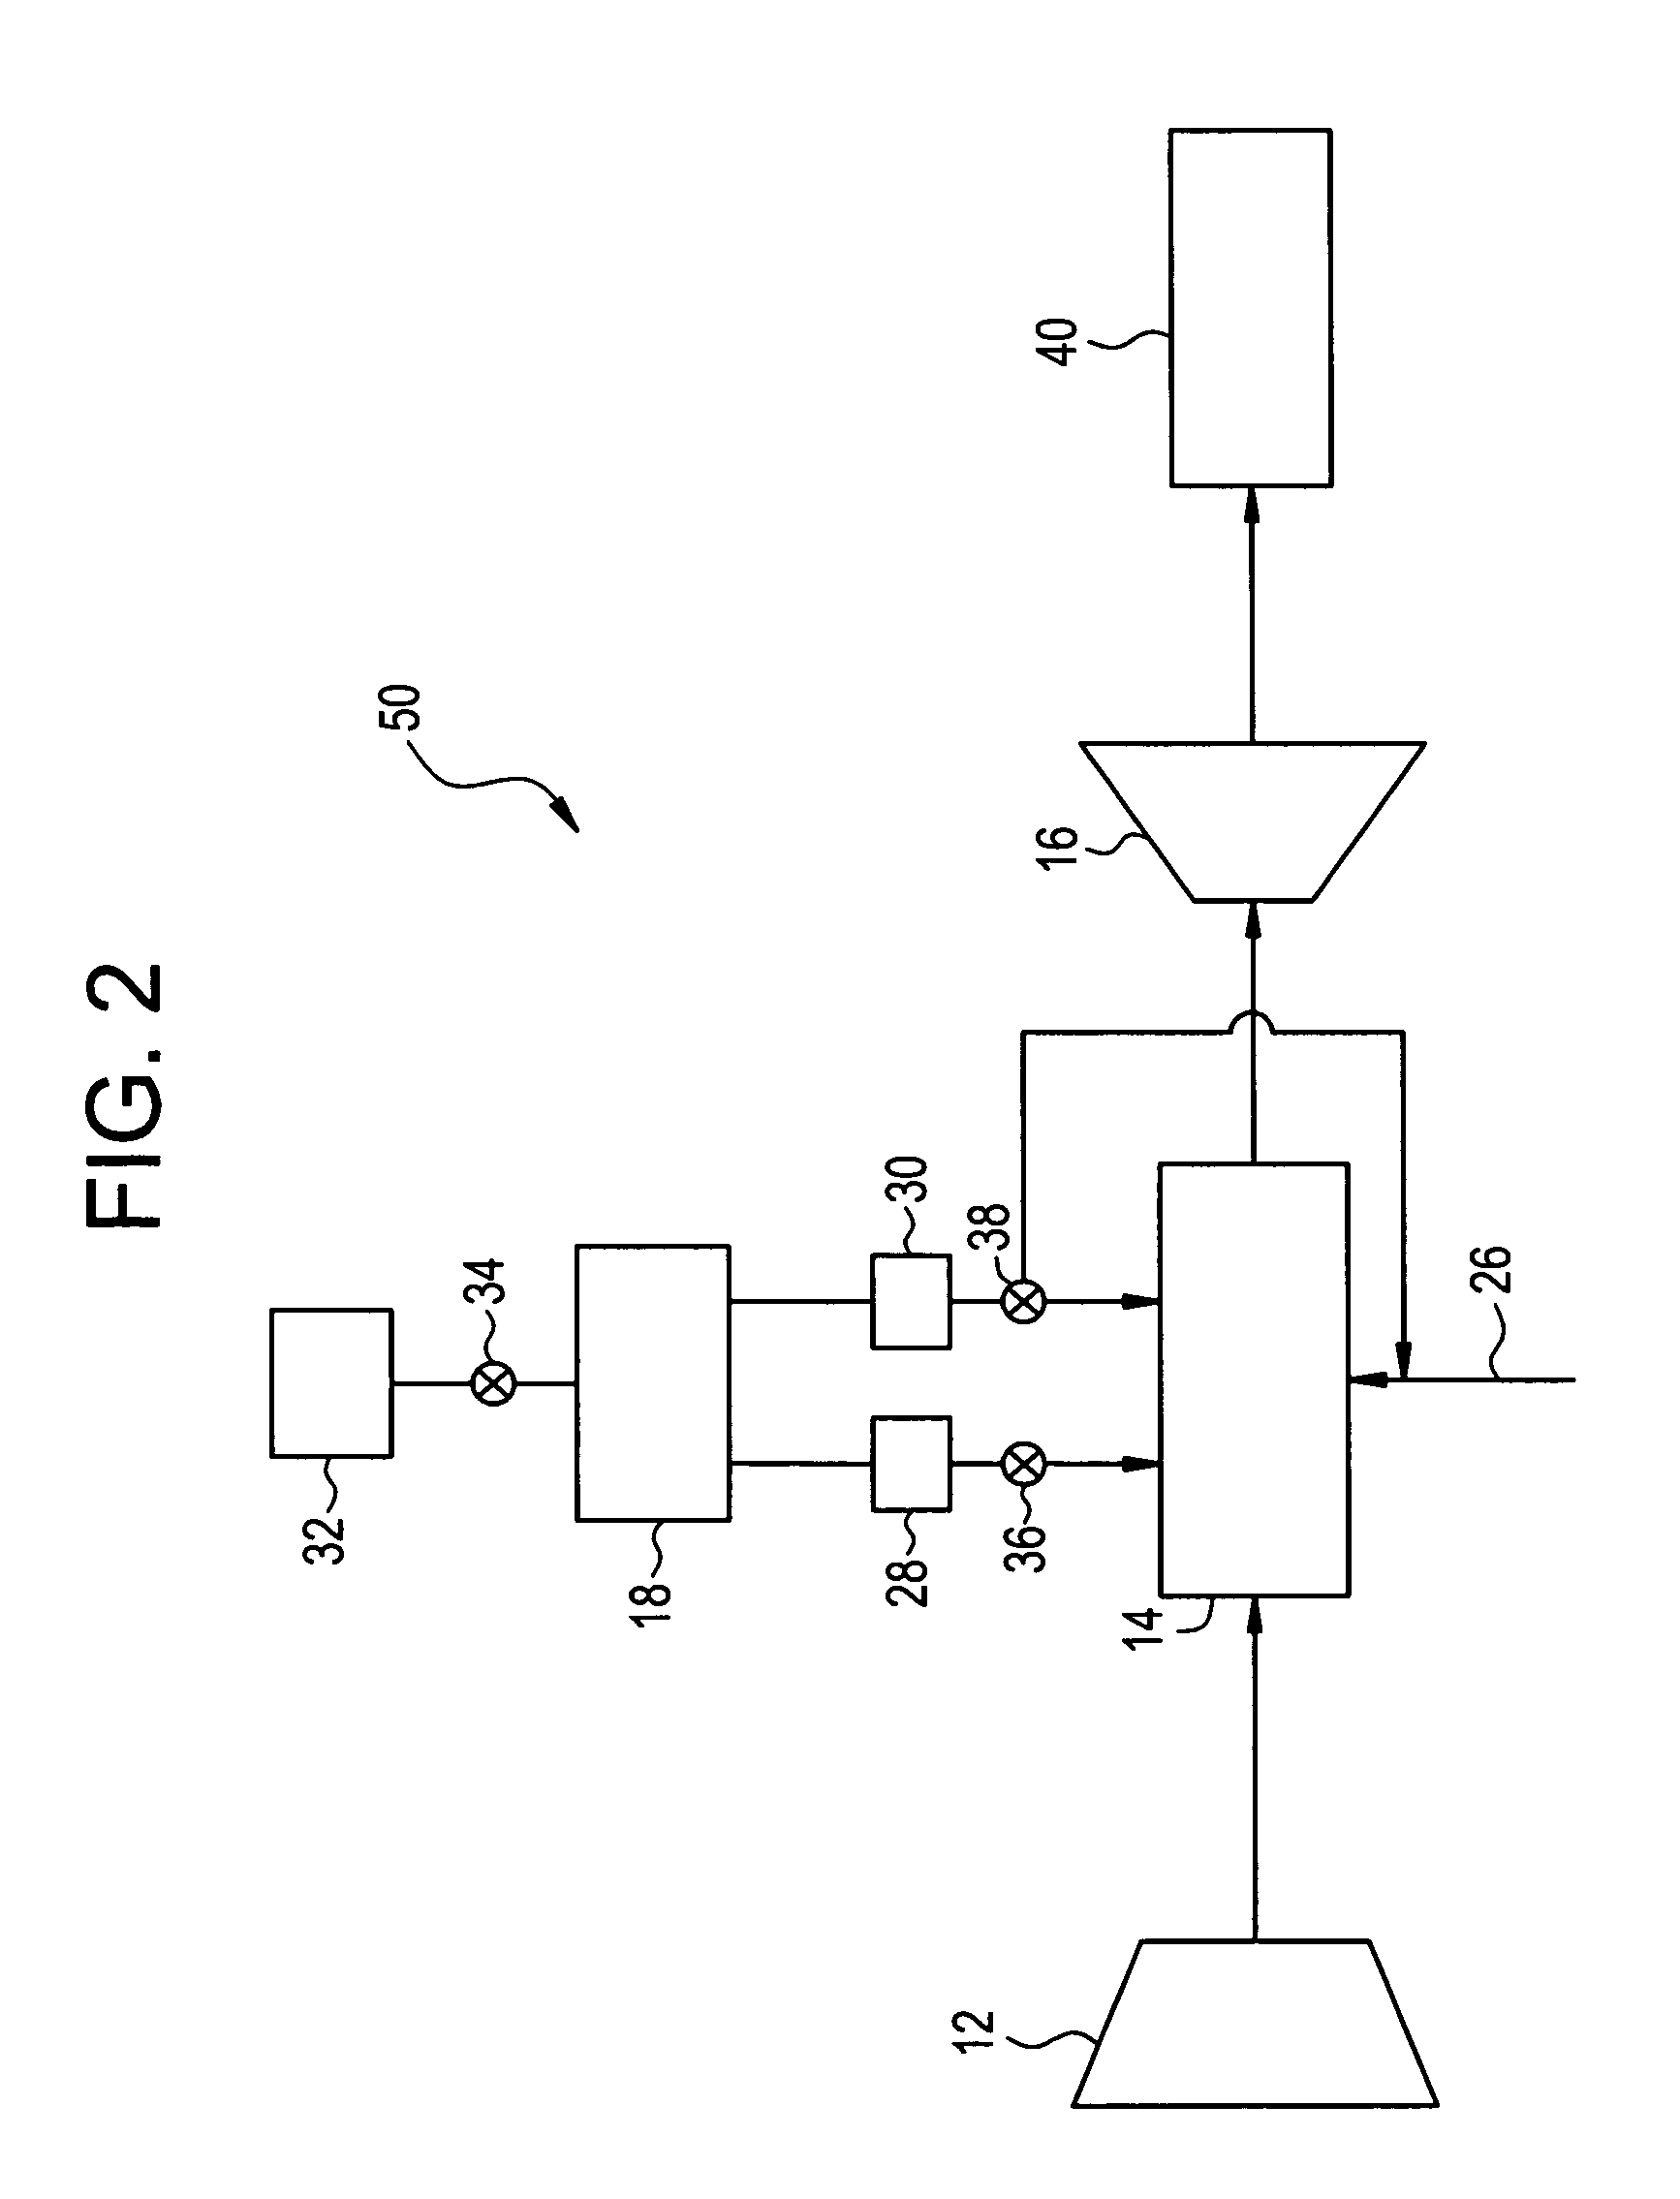 Systems and methods of reducing NO.sub.x emissions in gas turbine systems and internal combustion engines